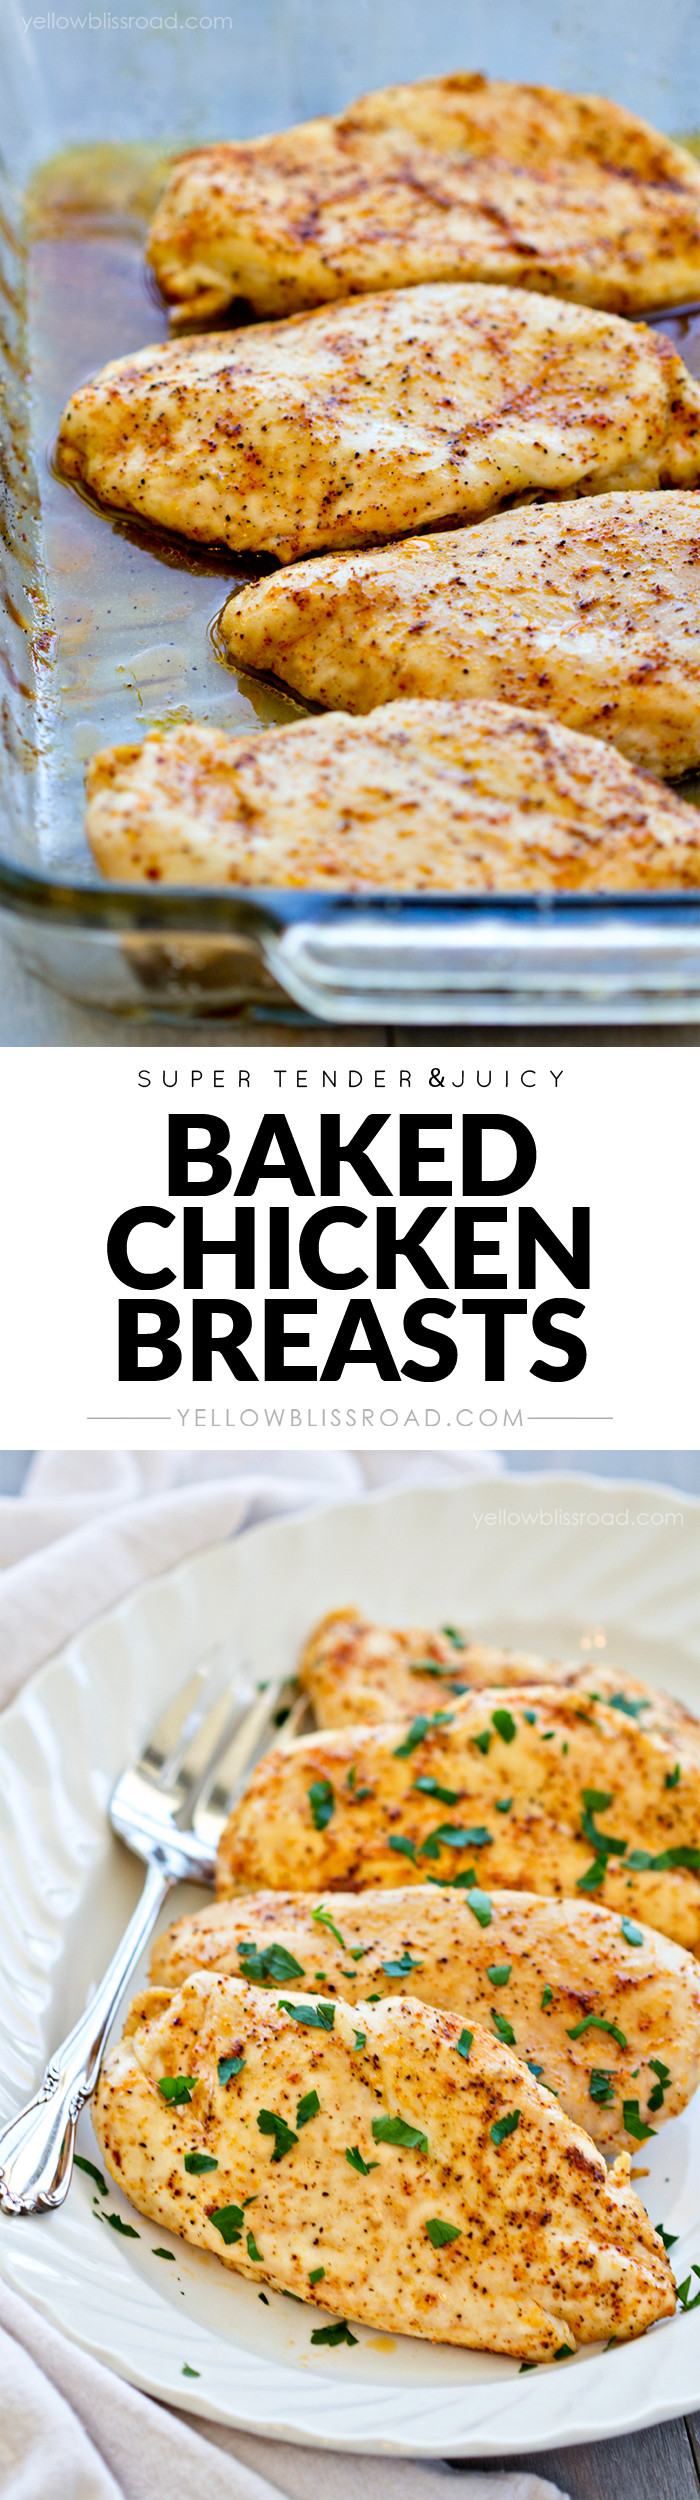 Juicy Baked Chicken
 Baked Chicken Breasts Yellow Bliss Road